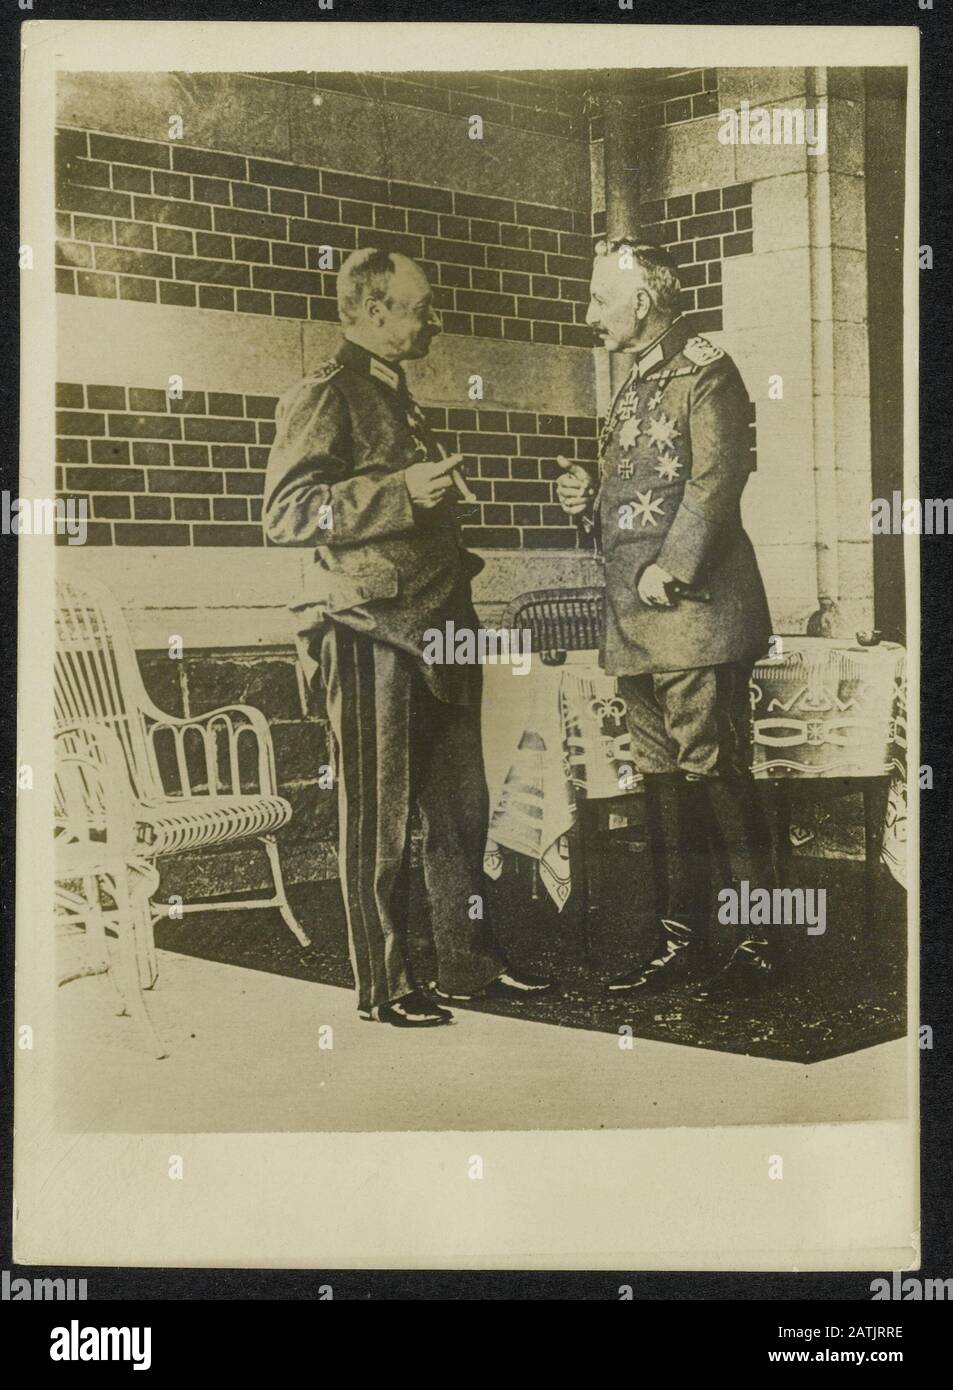 Description: His Majesty the Emperor of Germany in talks with His Majesty the King of Saxony [Wilhelm II] Date: {1914-1918} Keywords: WWI, dynasties Person Name : Friedrich August Iii, Wilhelm II, emperor of Germany Stock Photo